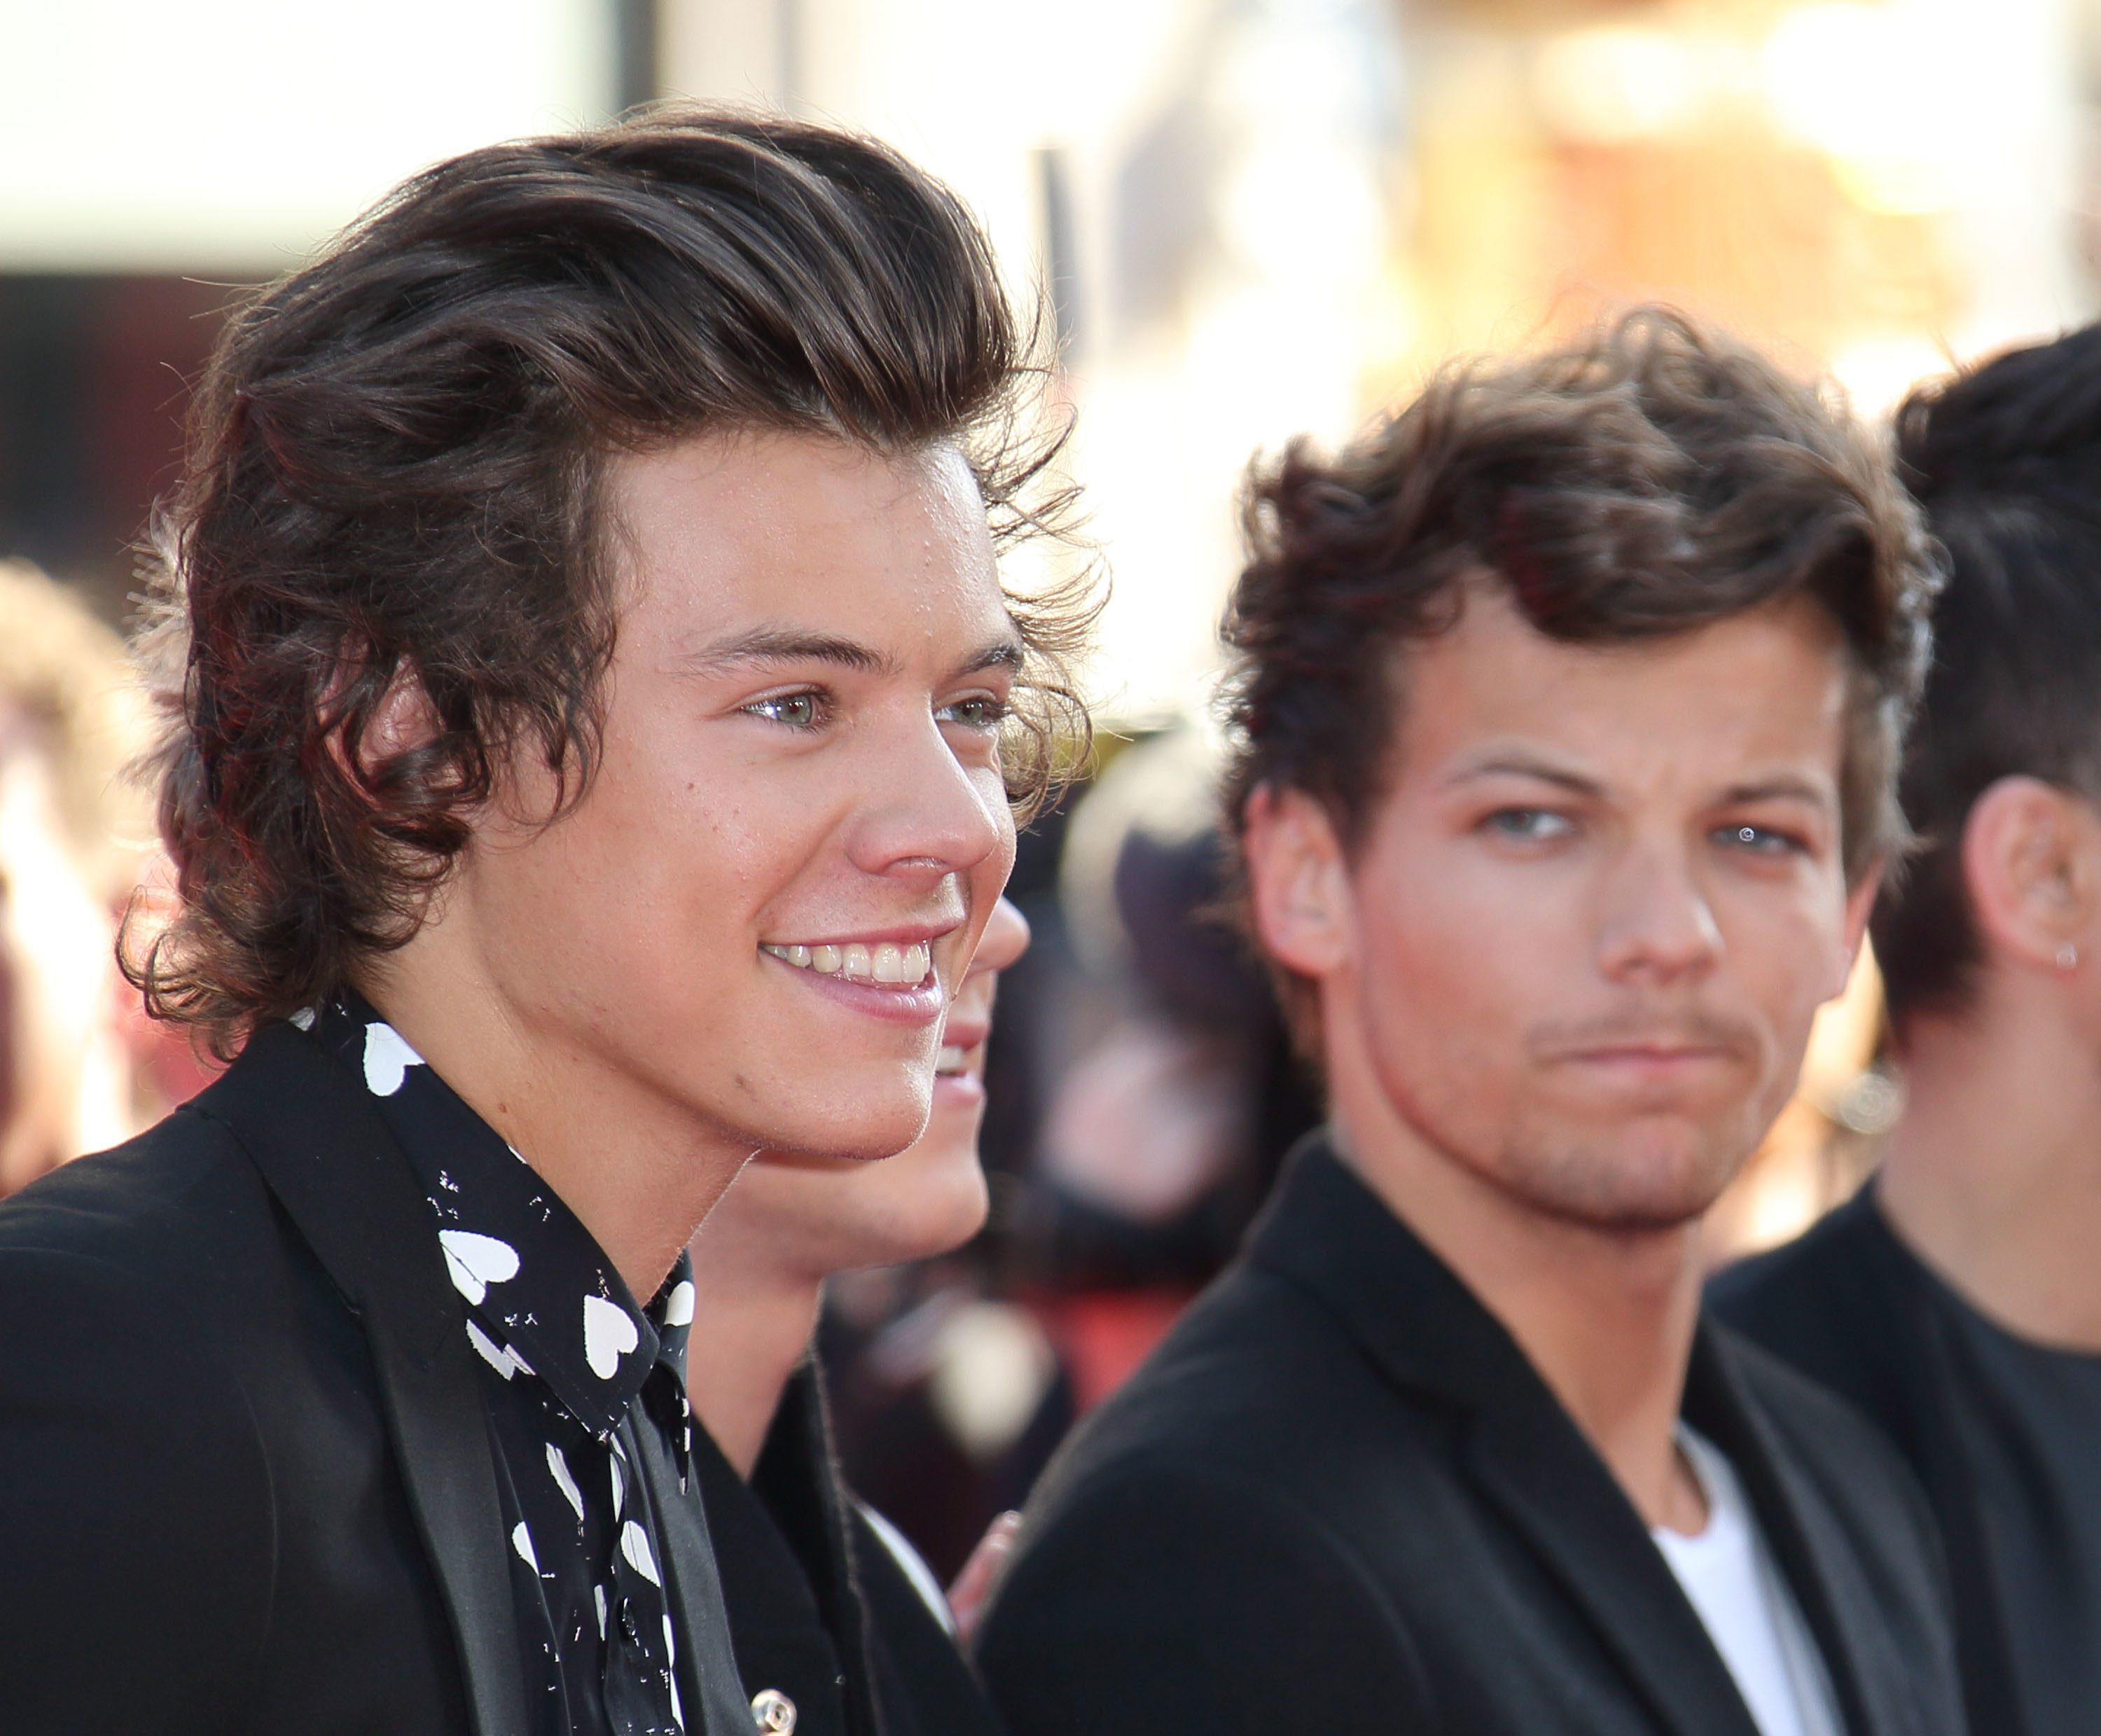 Harry Styles and Louis Tomlinson on the red carpet, Styles in a patterned shirt with a blazer, Tomlinson in plain tee and blazer